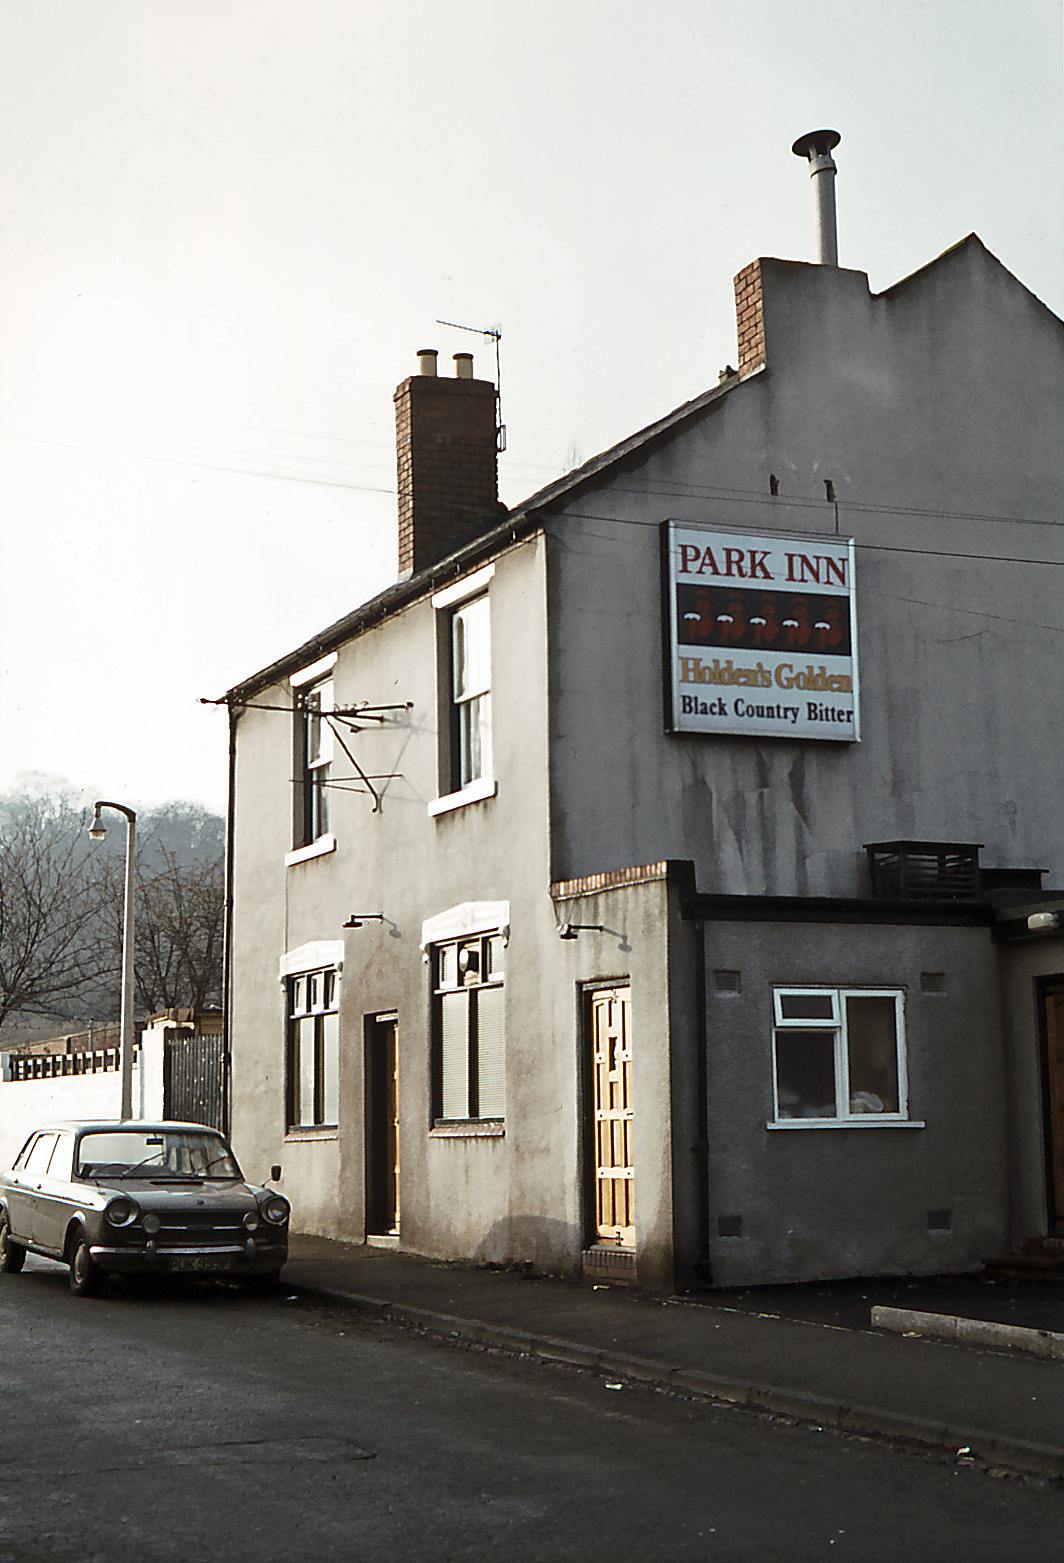 ParkInn, Woodsetton, Dudley, December 1978 The brewery tap of Holden’s Brewery.